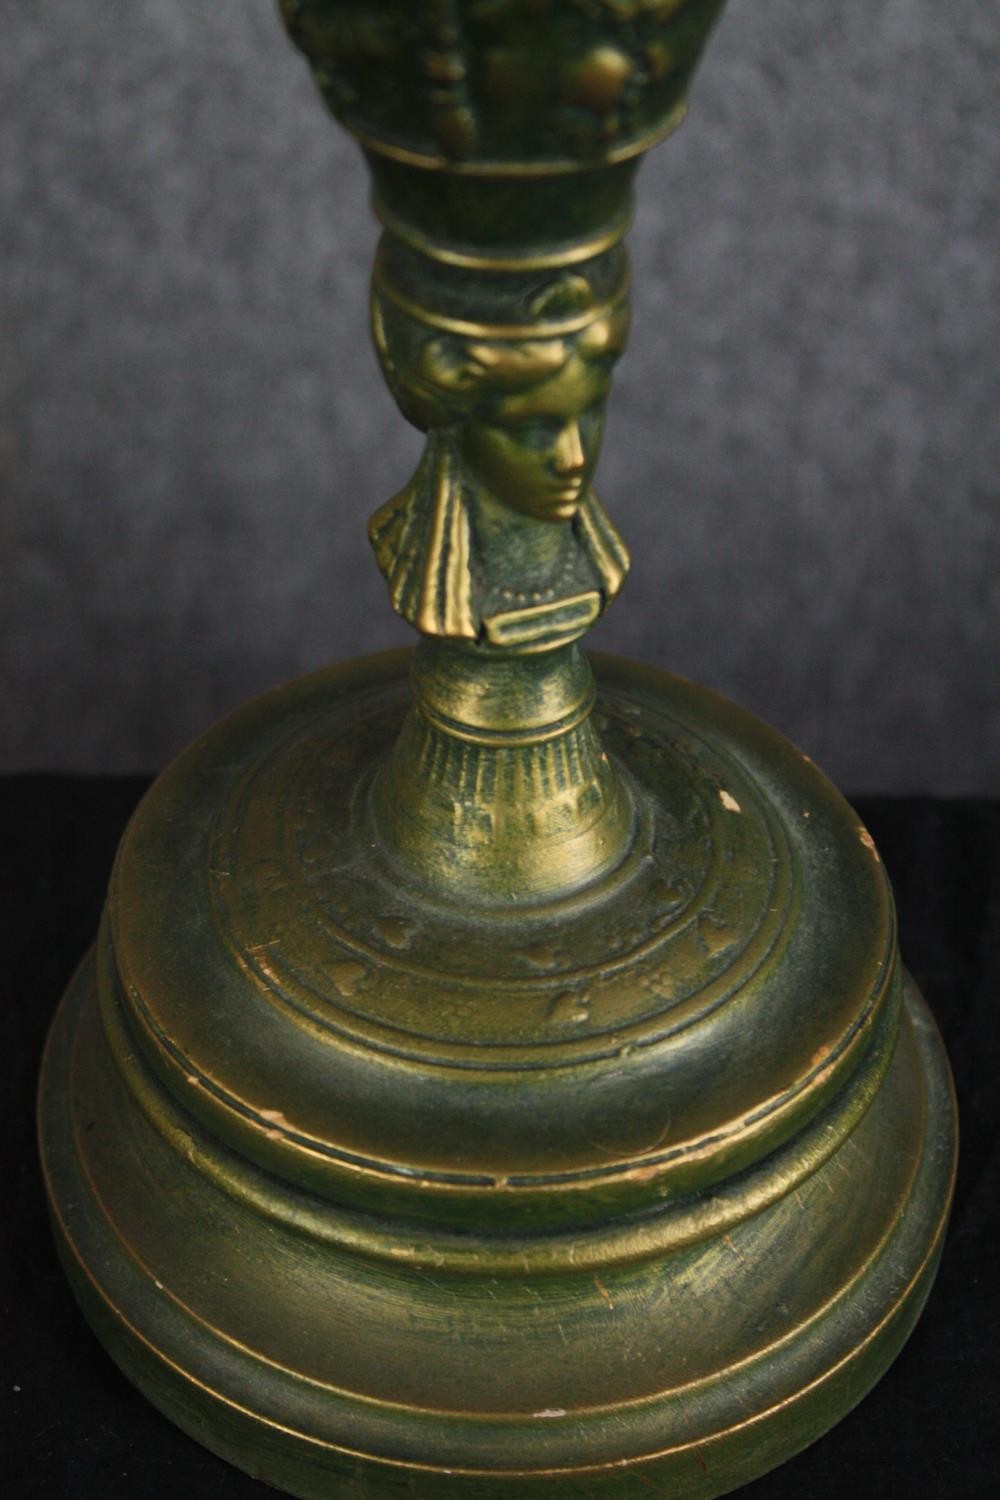 A pair of painted wooden urn design lamps. Decorated with cherubs and a worn greenish gold finish. - Image 4 of 4